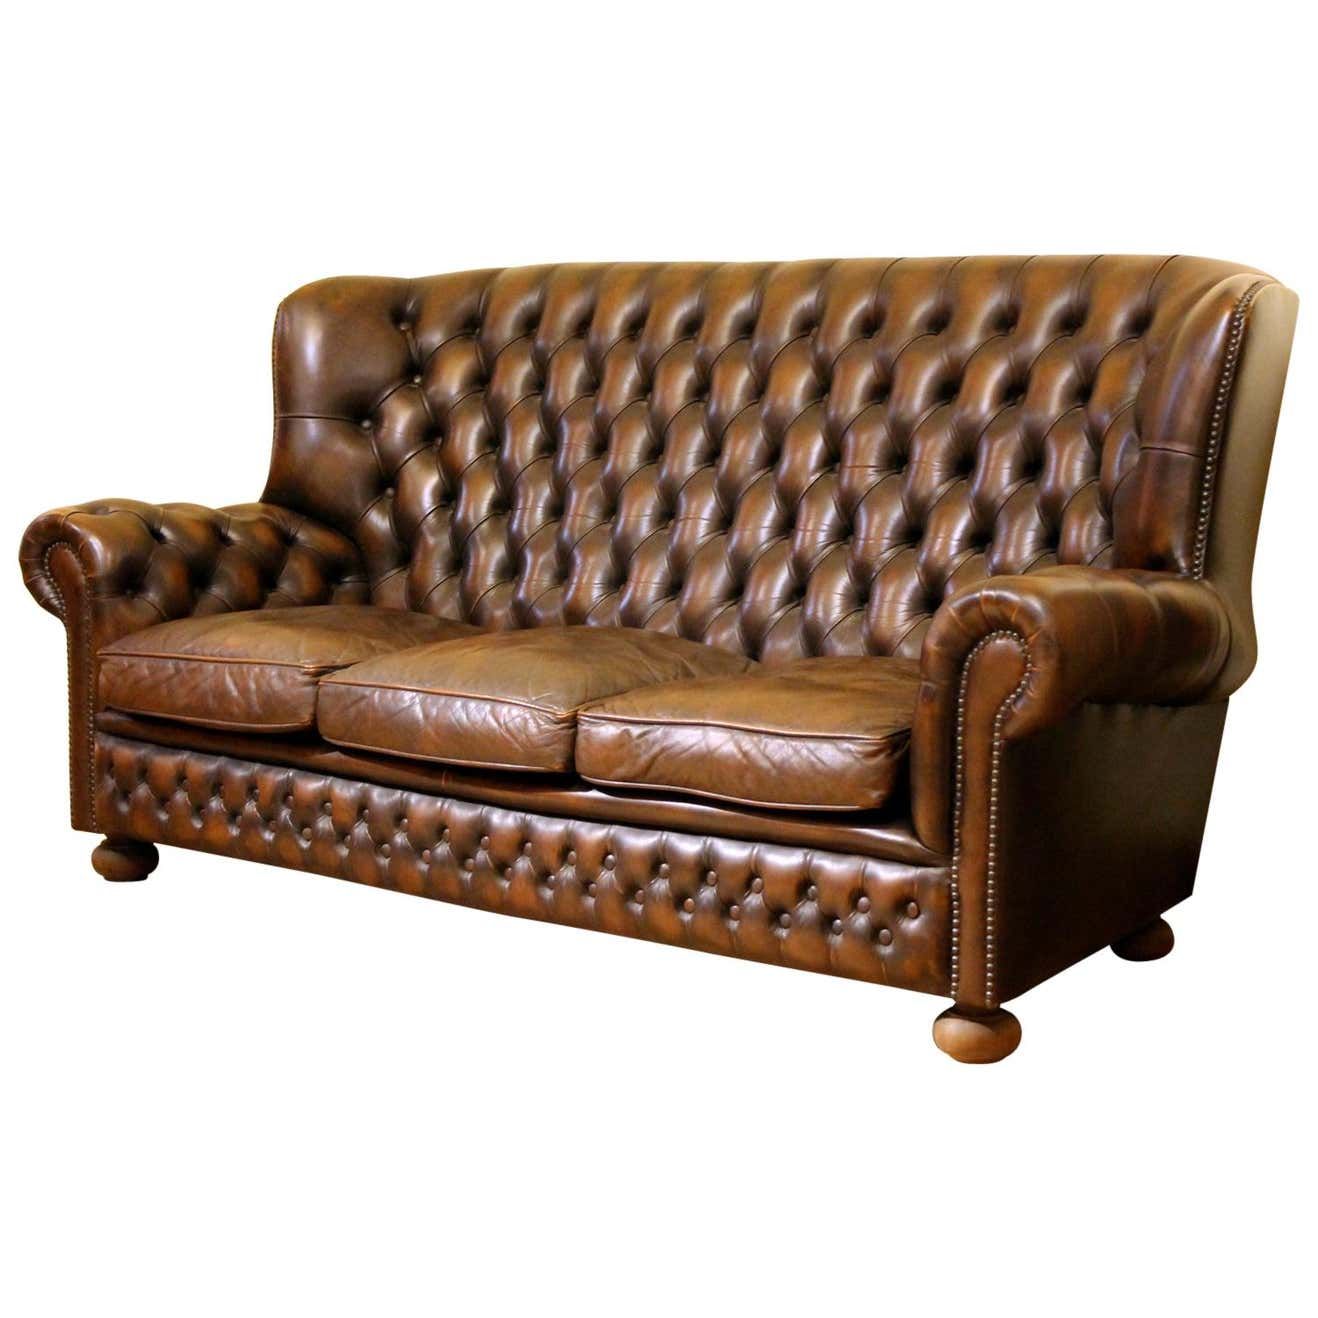 Vintage Chesterfield Sofa Brown Leather